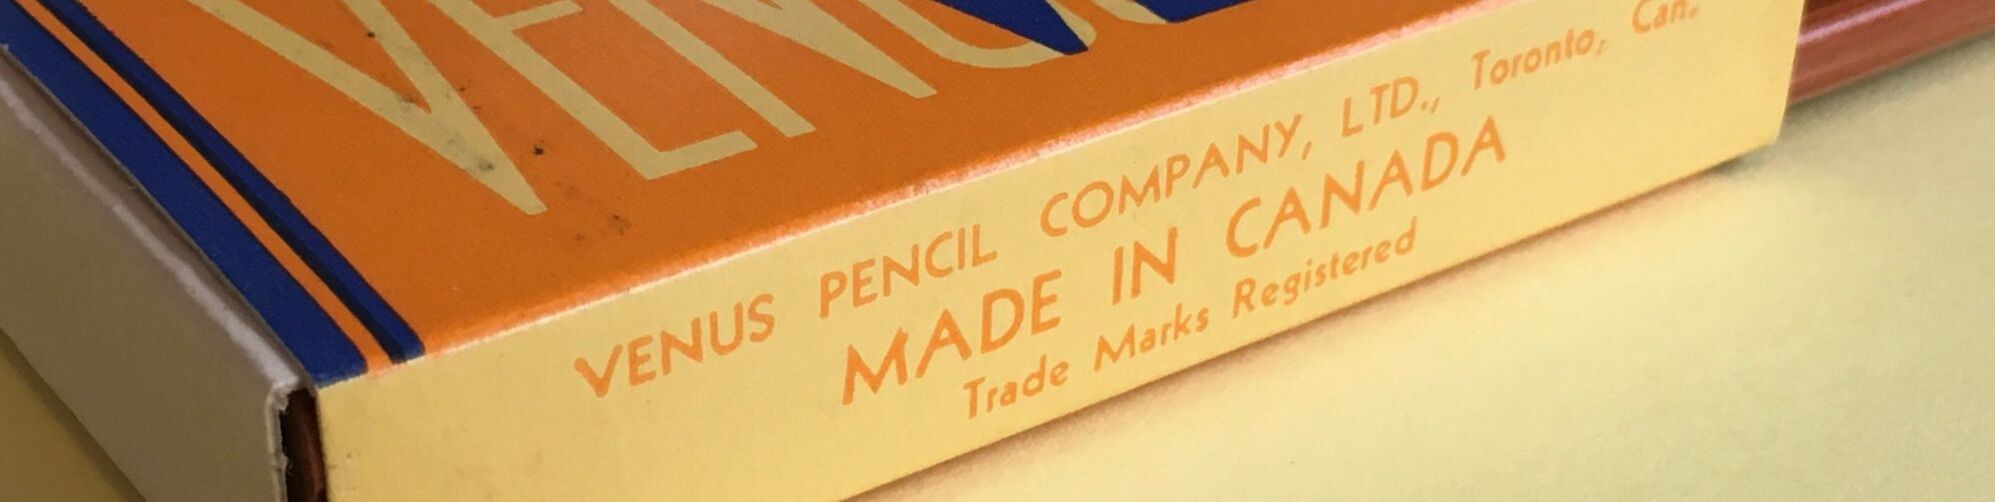 24 Venus Tracing Pencils # 3823 t2 w/Inner & Outer Boxes, American Pencil  Co. NY